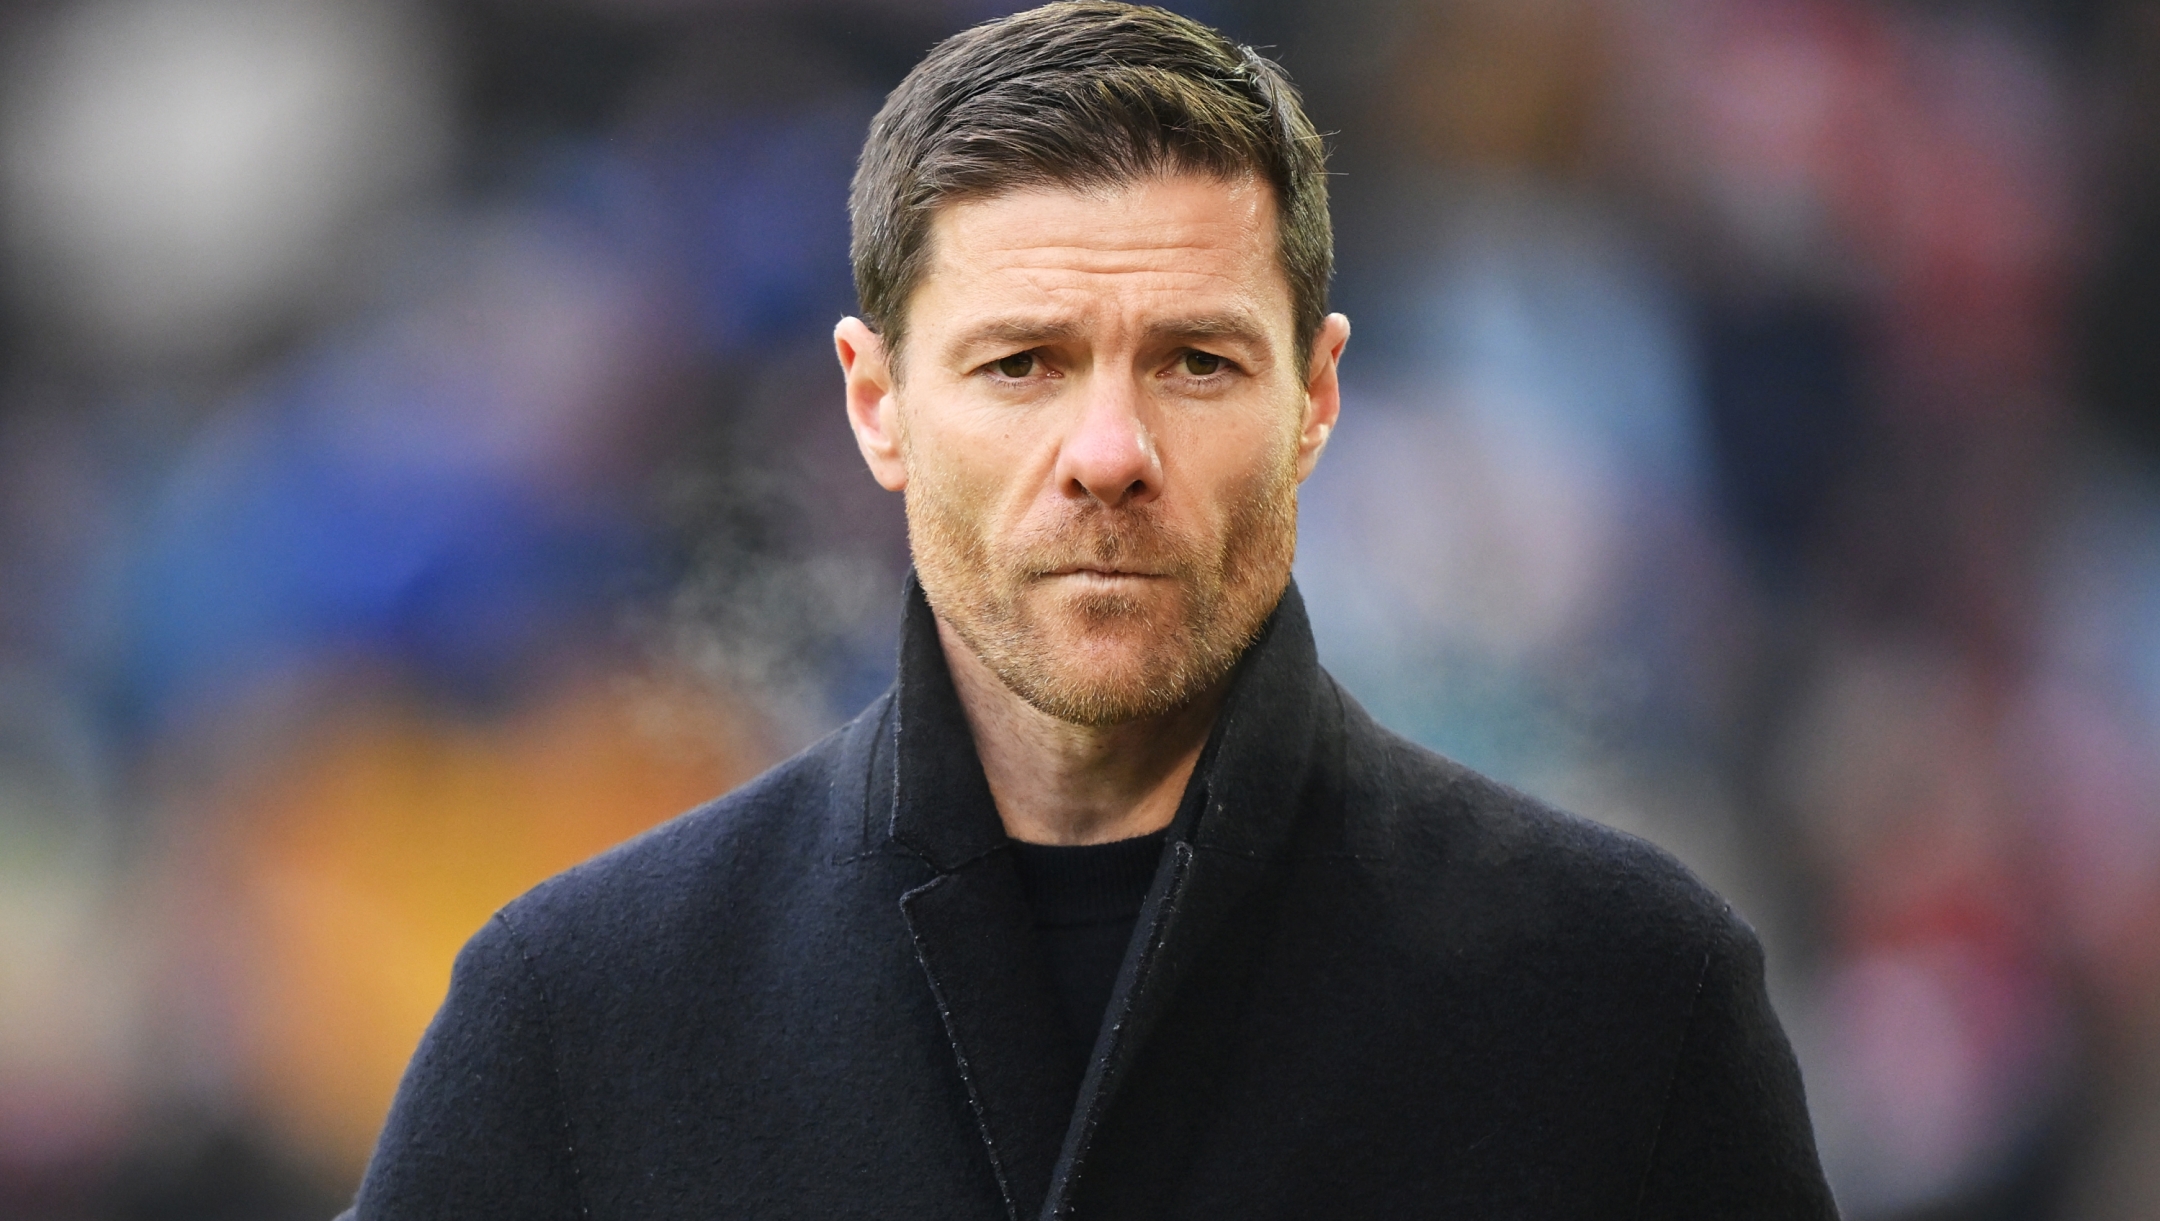 AUGSBURG, GERMANY - JANUARY 13: Xabi Alonso, Head Coach of Bayer Leverkusen, looks on prior to the Bundesliga match between FC Augsburg and Bayer 04 Leverkusen at WWK-Arena on January 13, 2024 in Augsburg, Germany. (Photo by Sebastian Widmann/Getty Images)